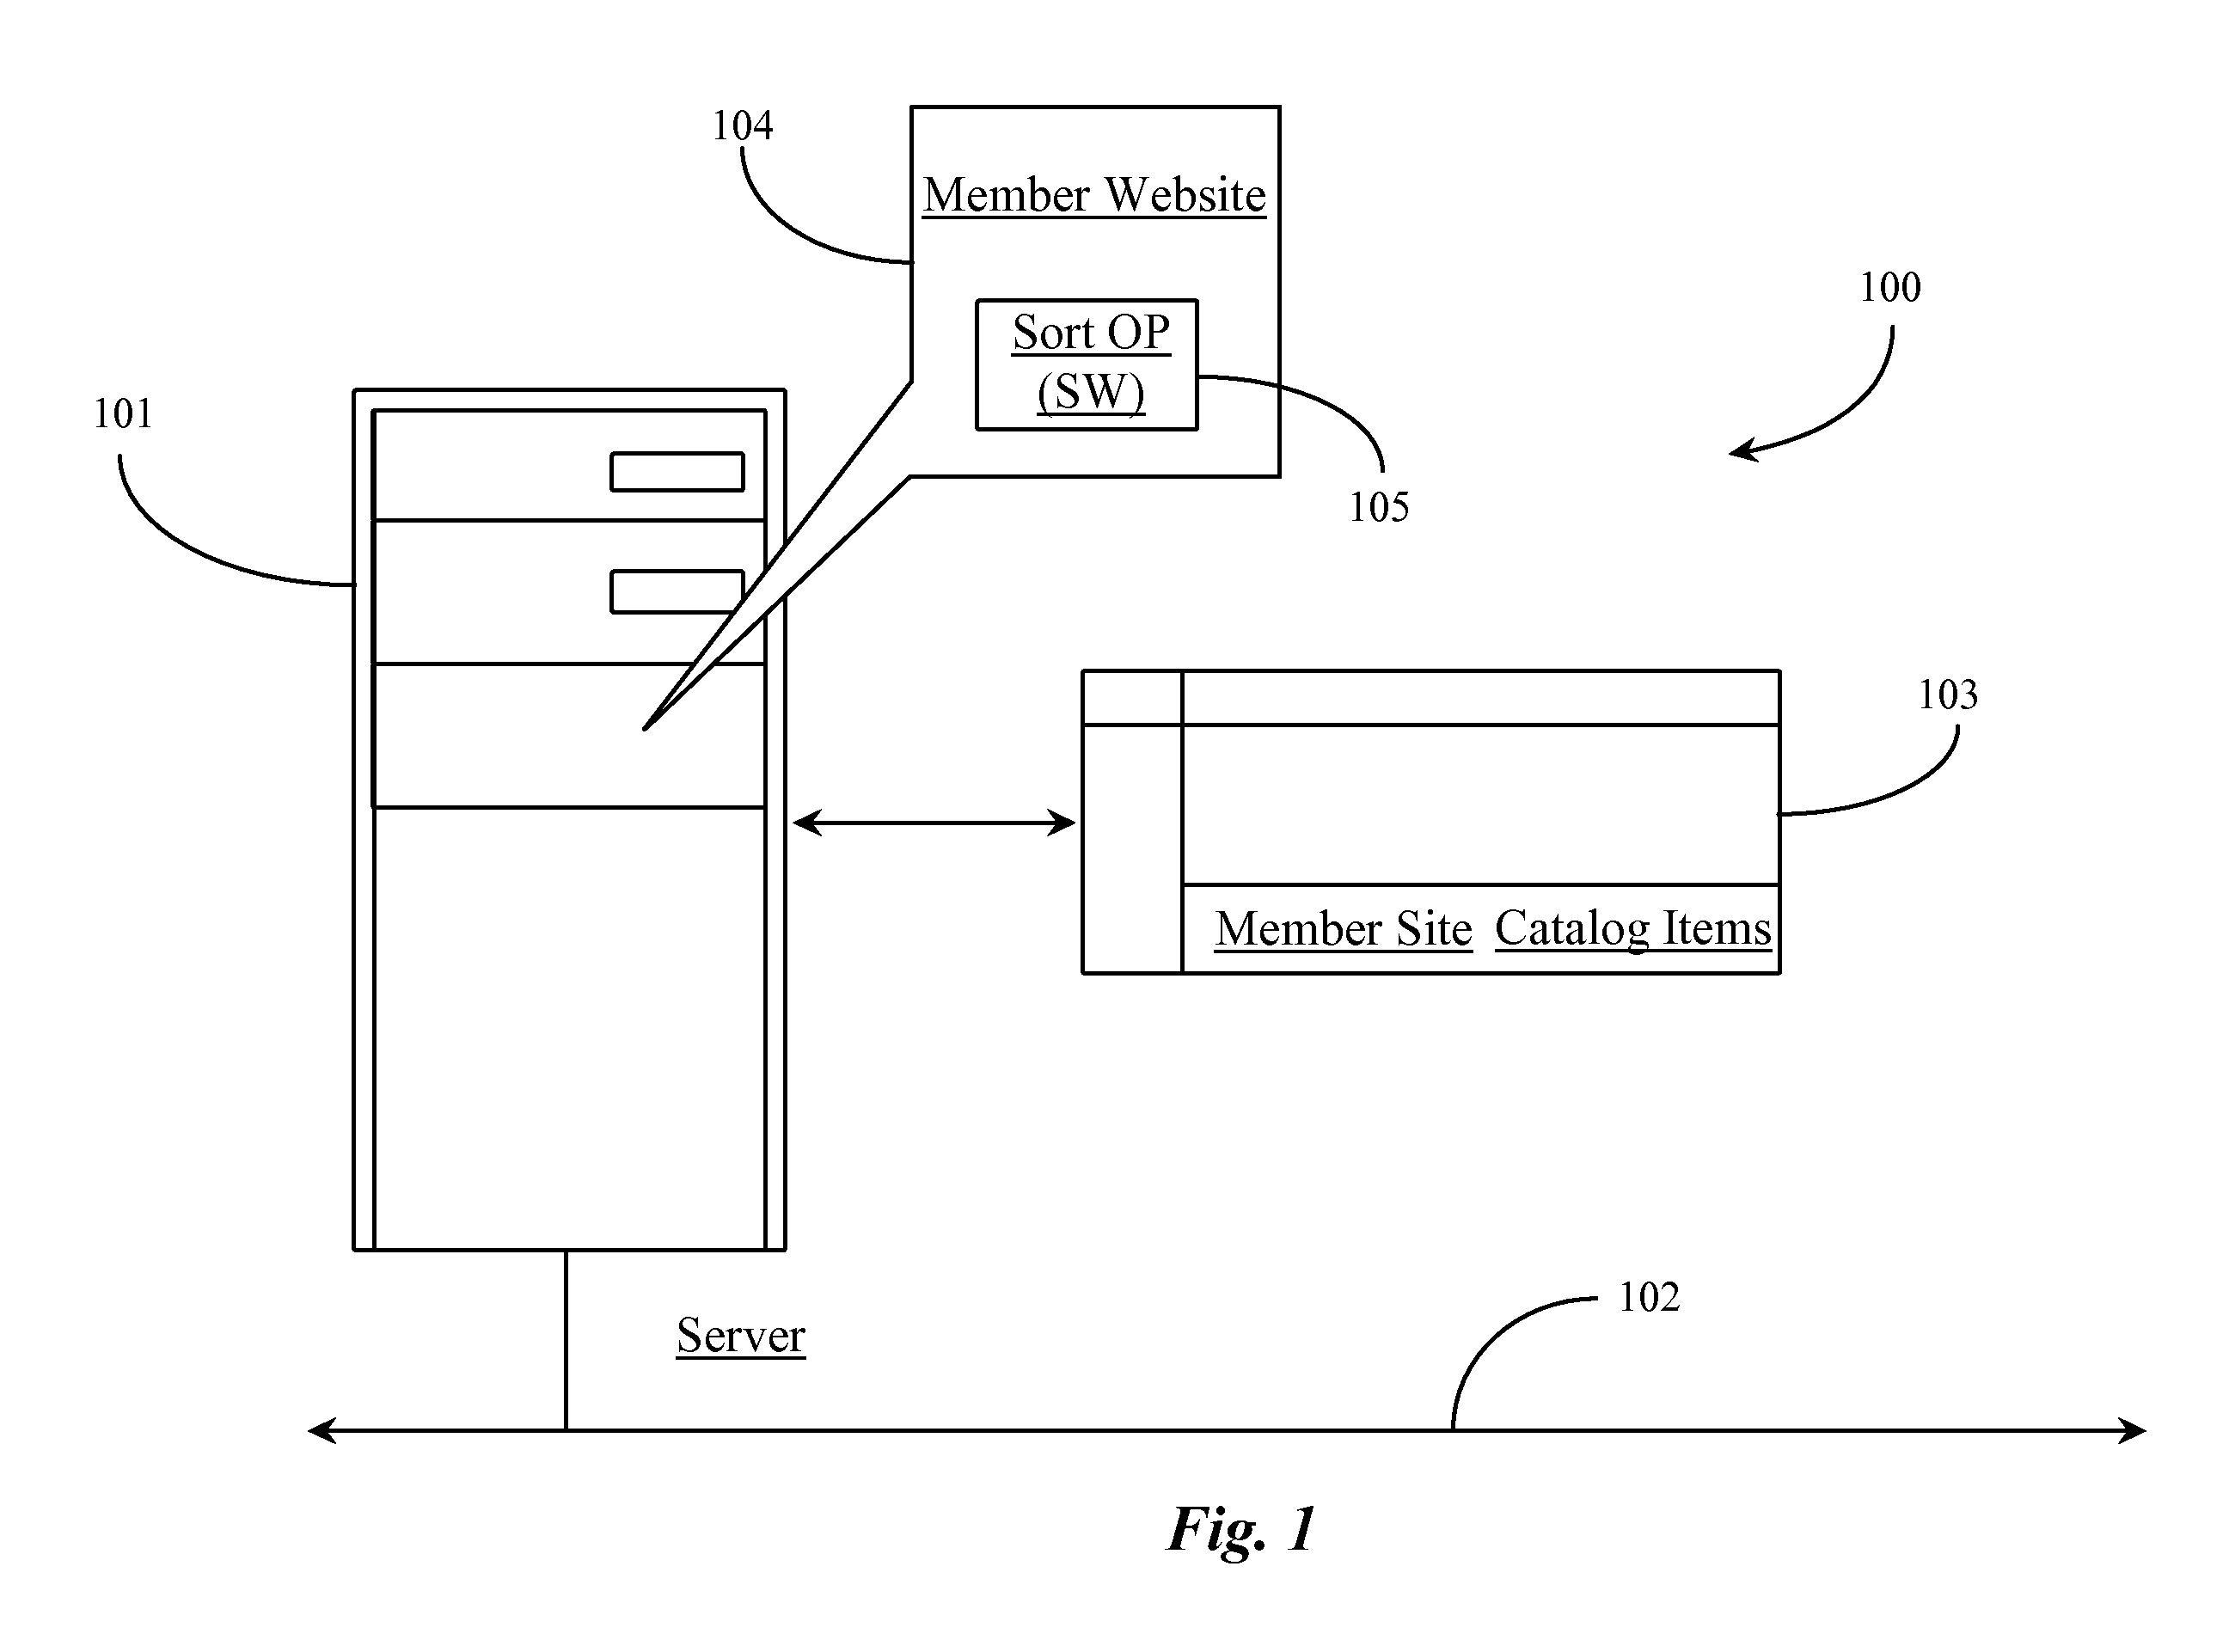 Method for Sorting and Displaying Items in a Virtual Catalog